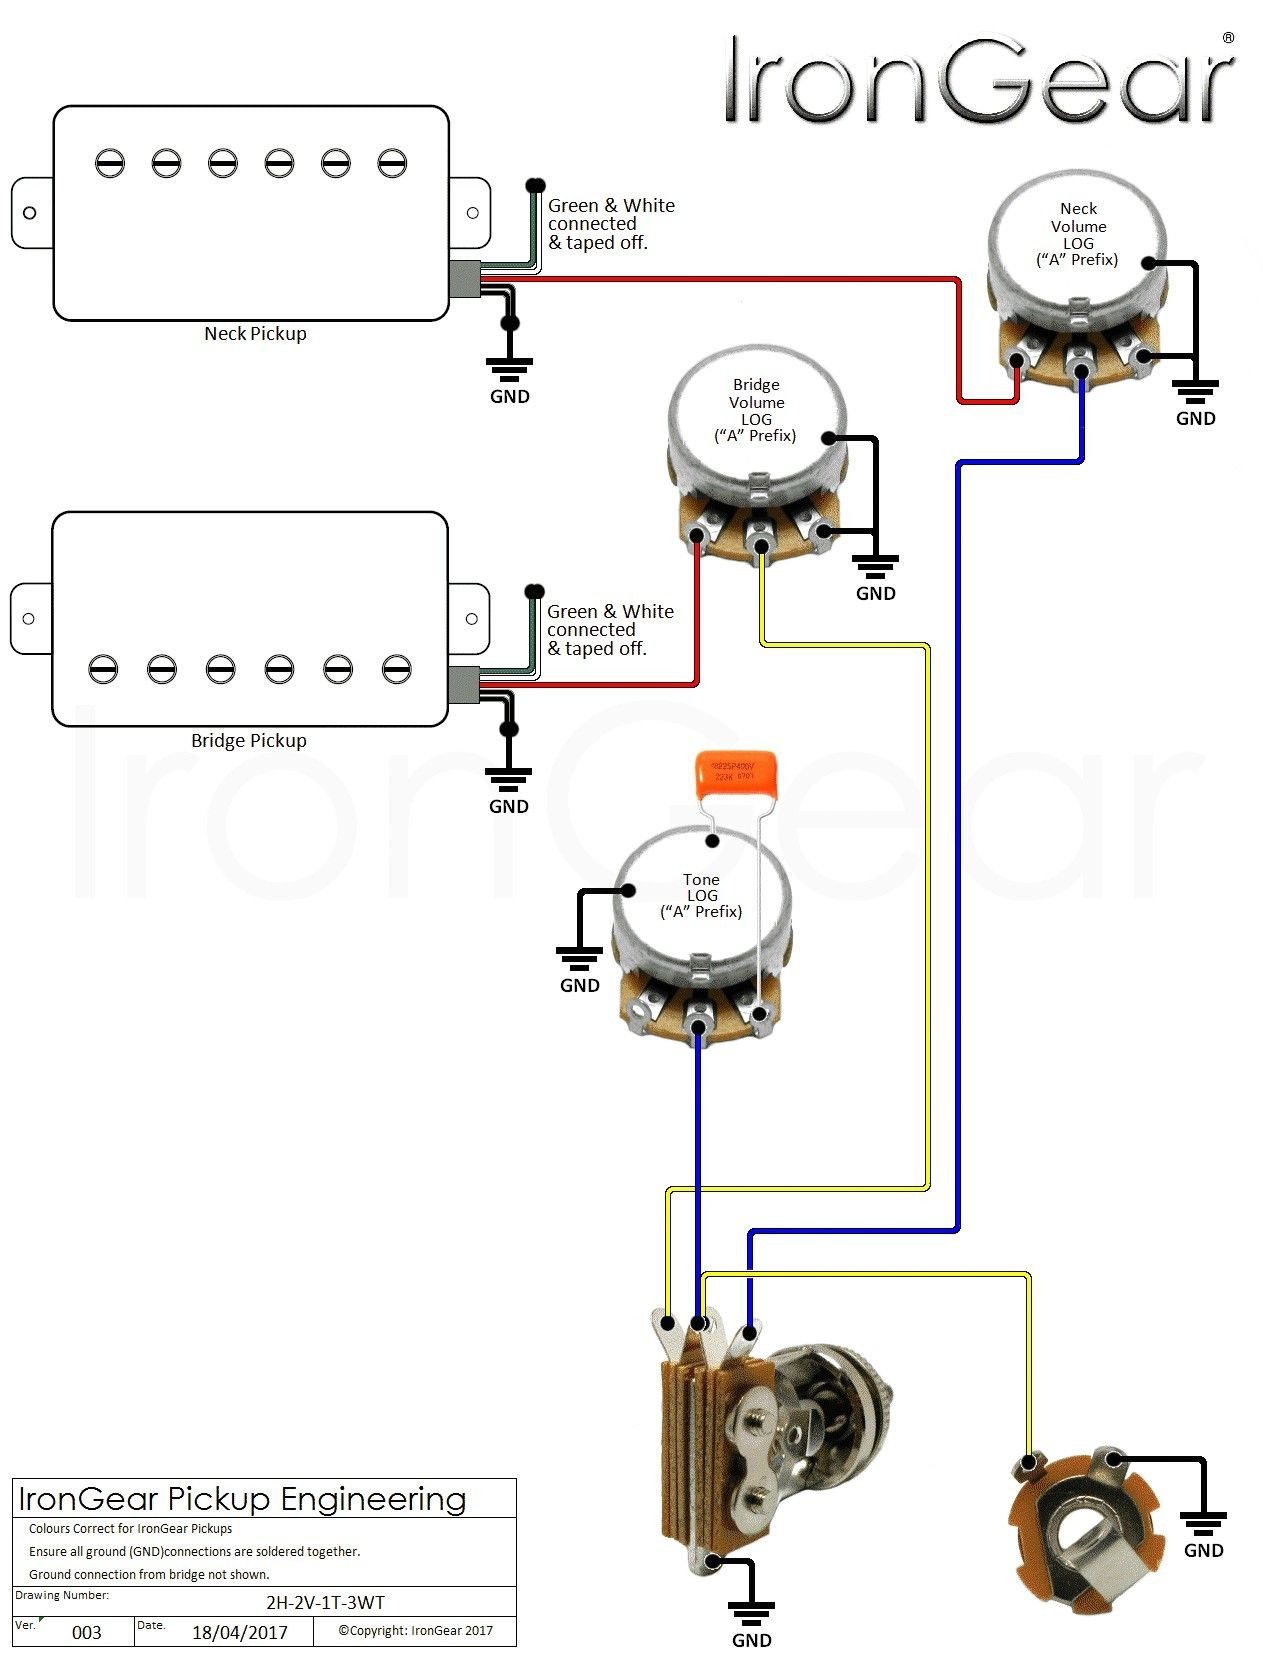 Aswc-1 Wiring Diagram from mainetreasurechest.com